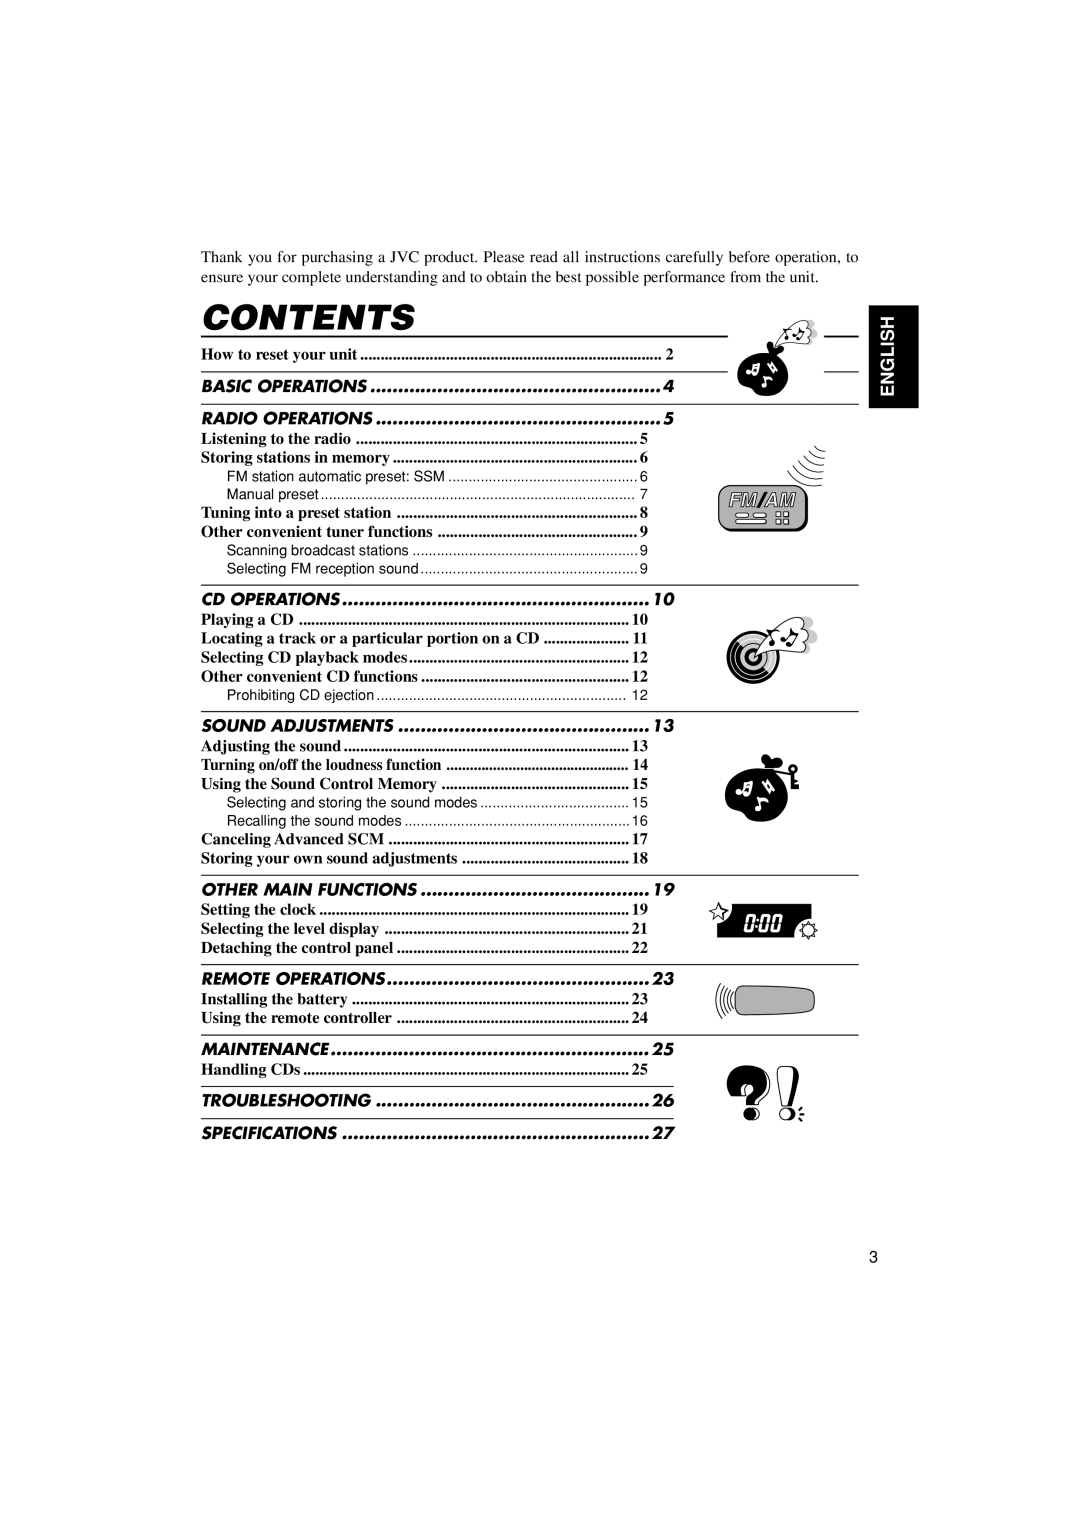 JVC KD-S670 manual Contents, English, Playing a CD, Locating a track or a particular portion on a CD 